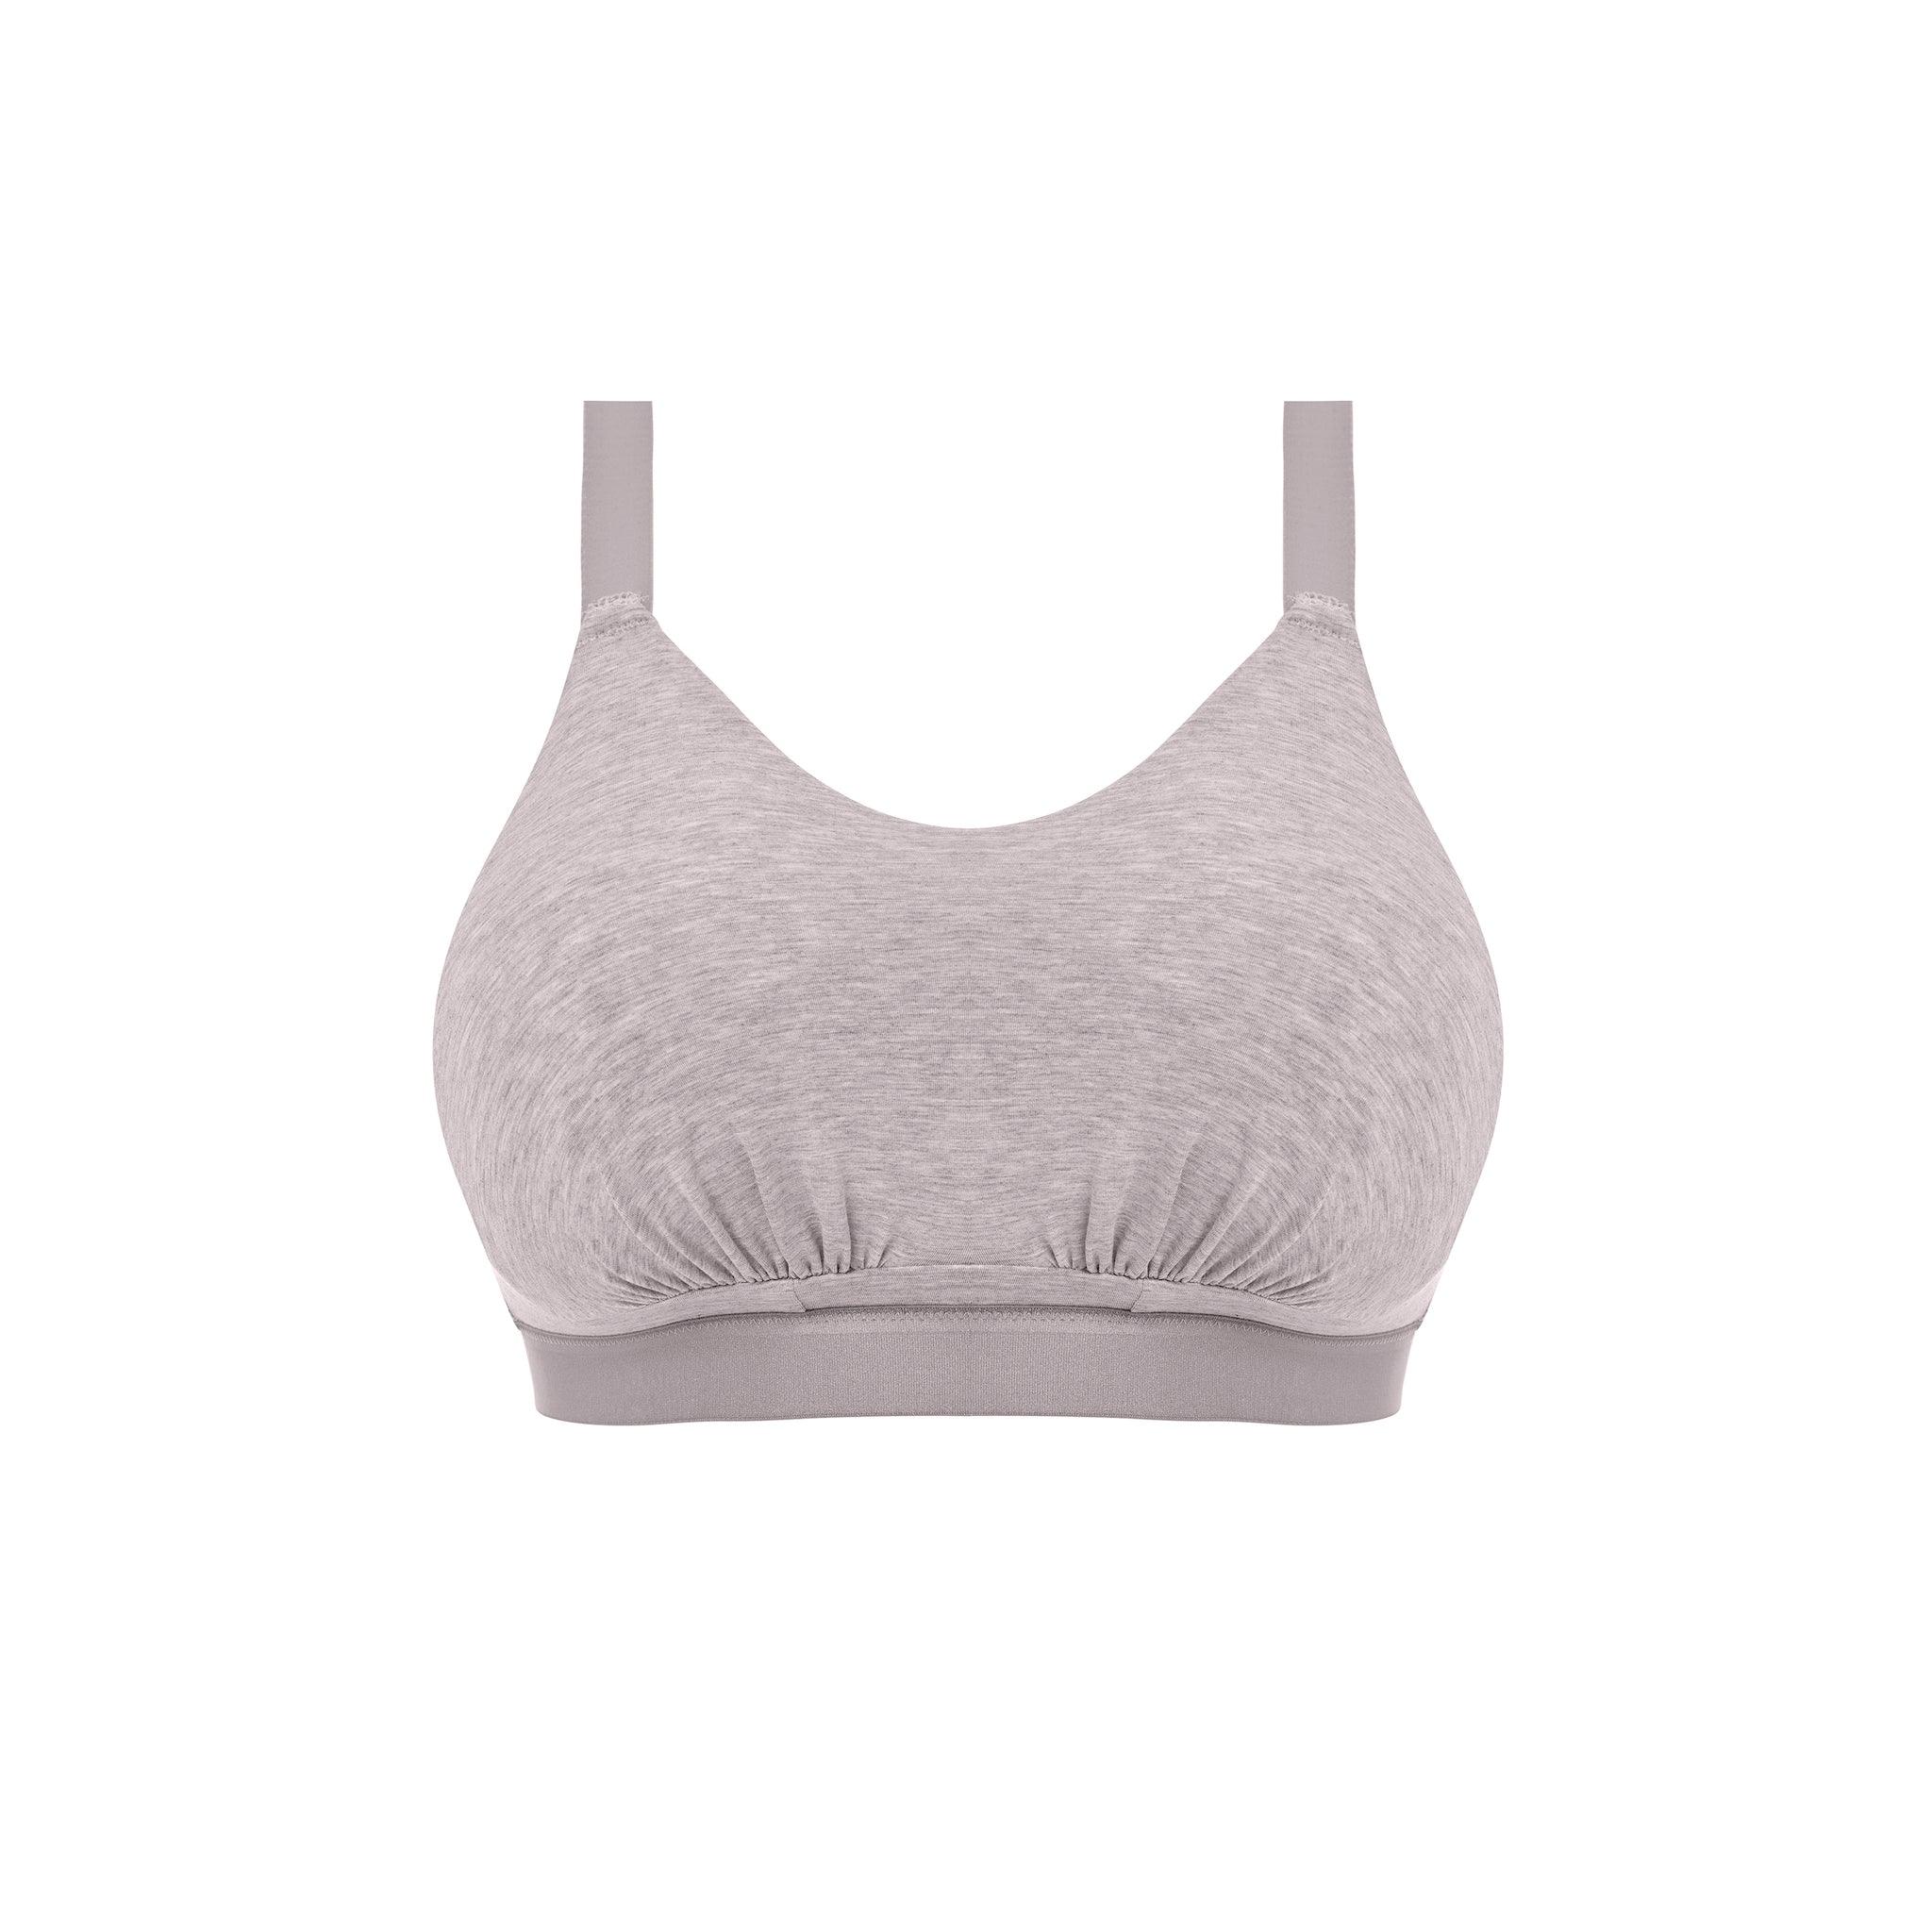 Elomi "Downtime" Grey Marl Non-Wired Bralette (F-JJ) - Lion's Lair Boutique - 32, 34, 36, 38, 40, 42, 44, continuity, elomi, F, FF, G, GG, H, HH, J, JJ, lingerie, SFT, wireless - Elomi